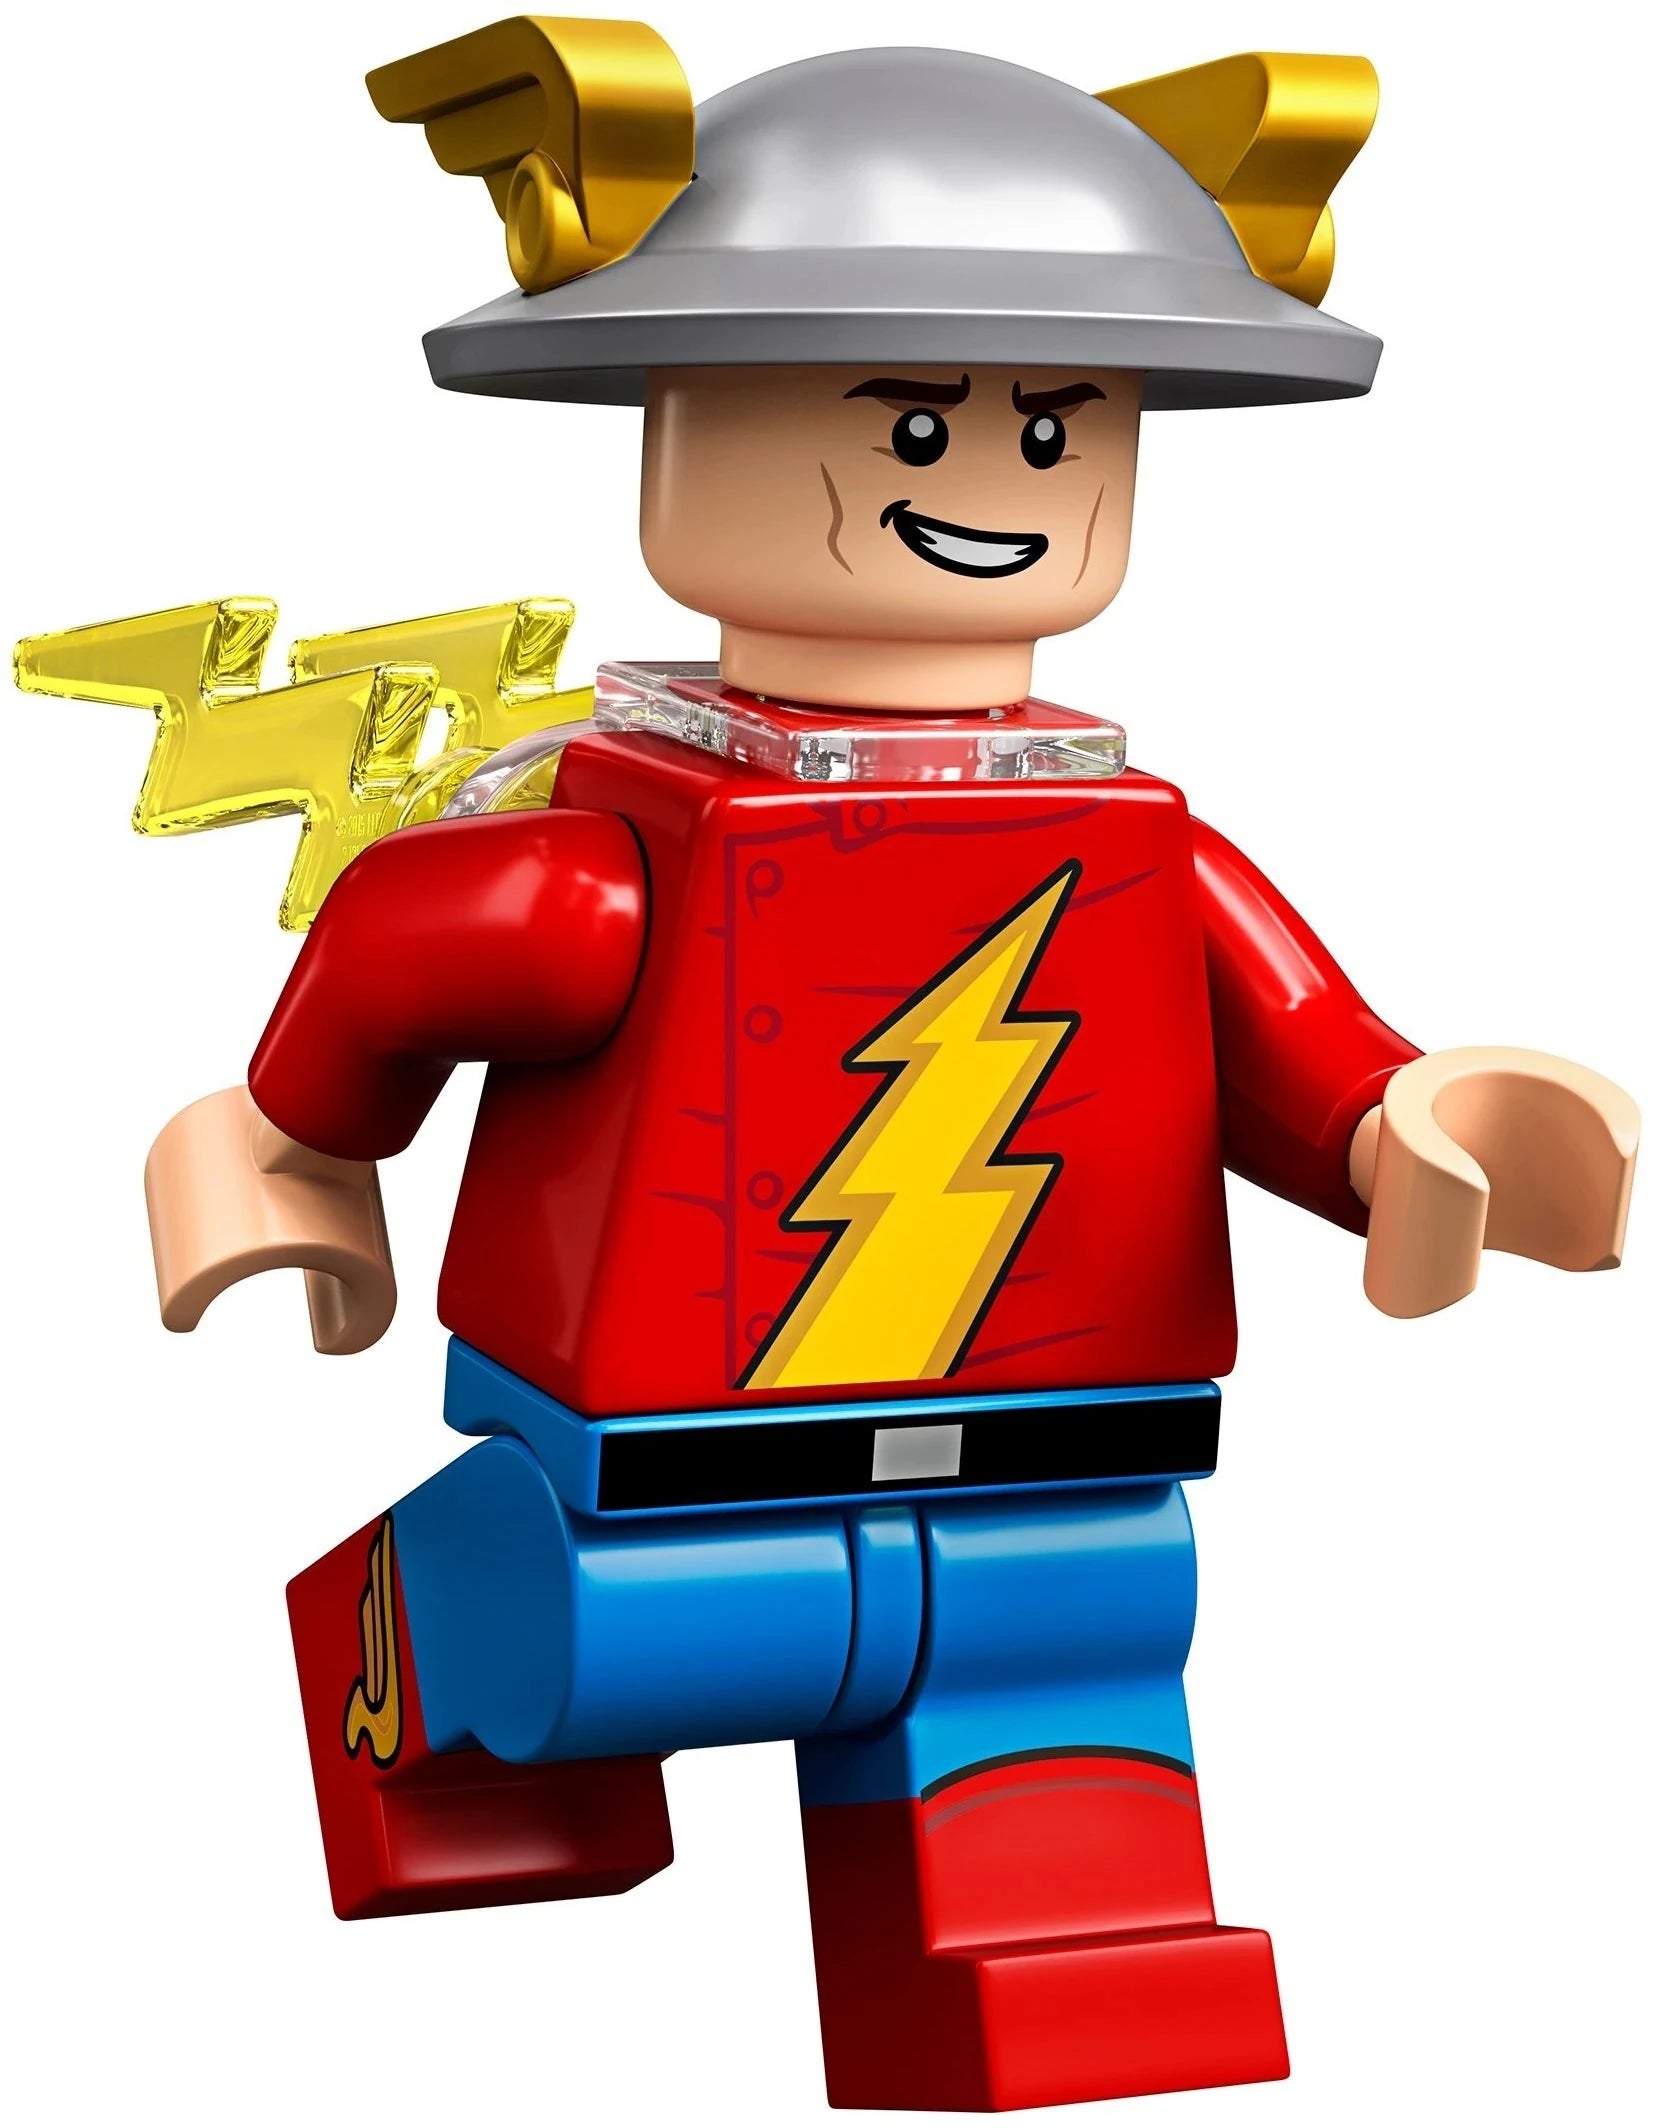 LEGO DC Super Heroes Series 1 The Flash 71026